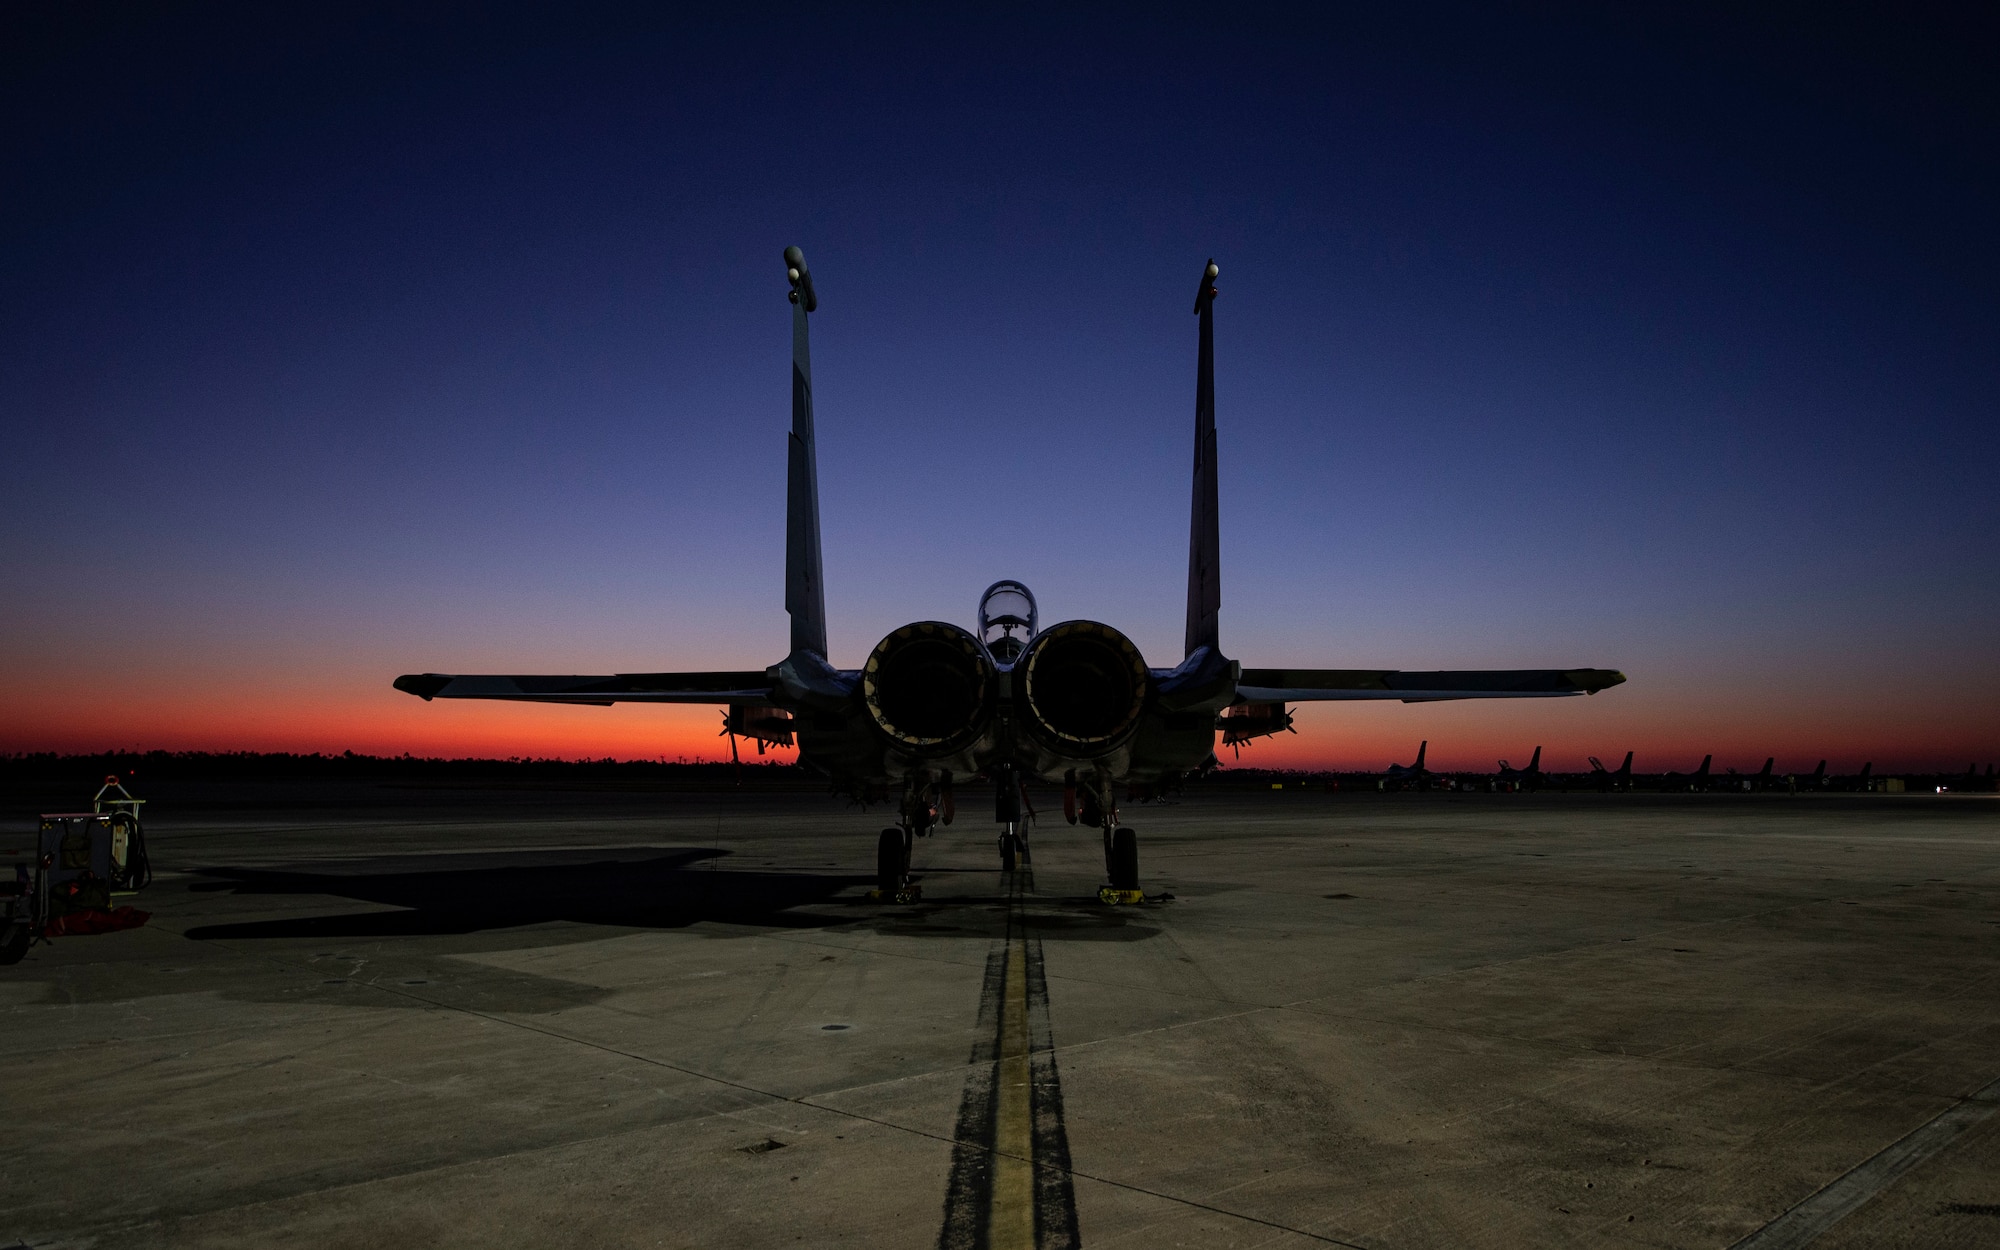 An aircraft sits on the flight line during sunrise.